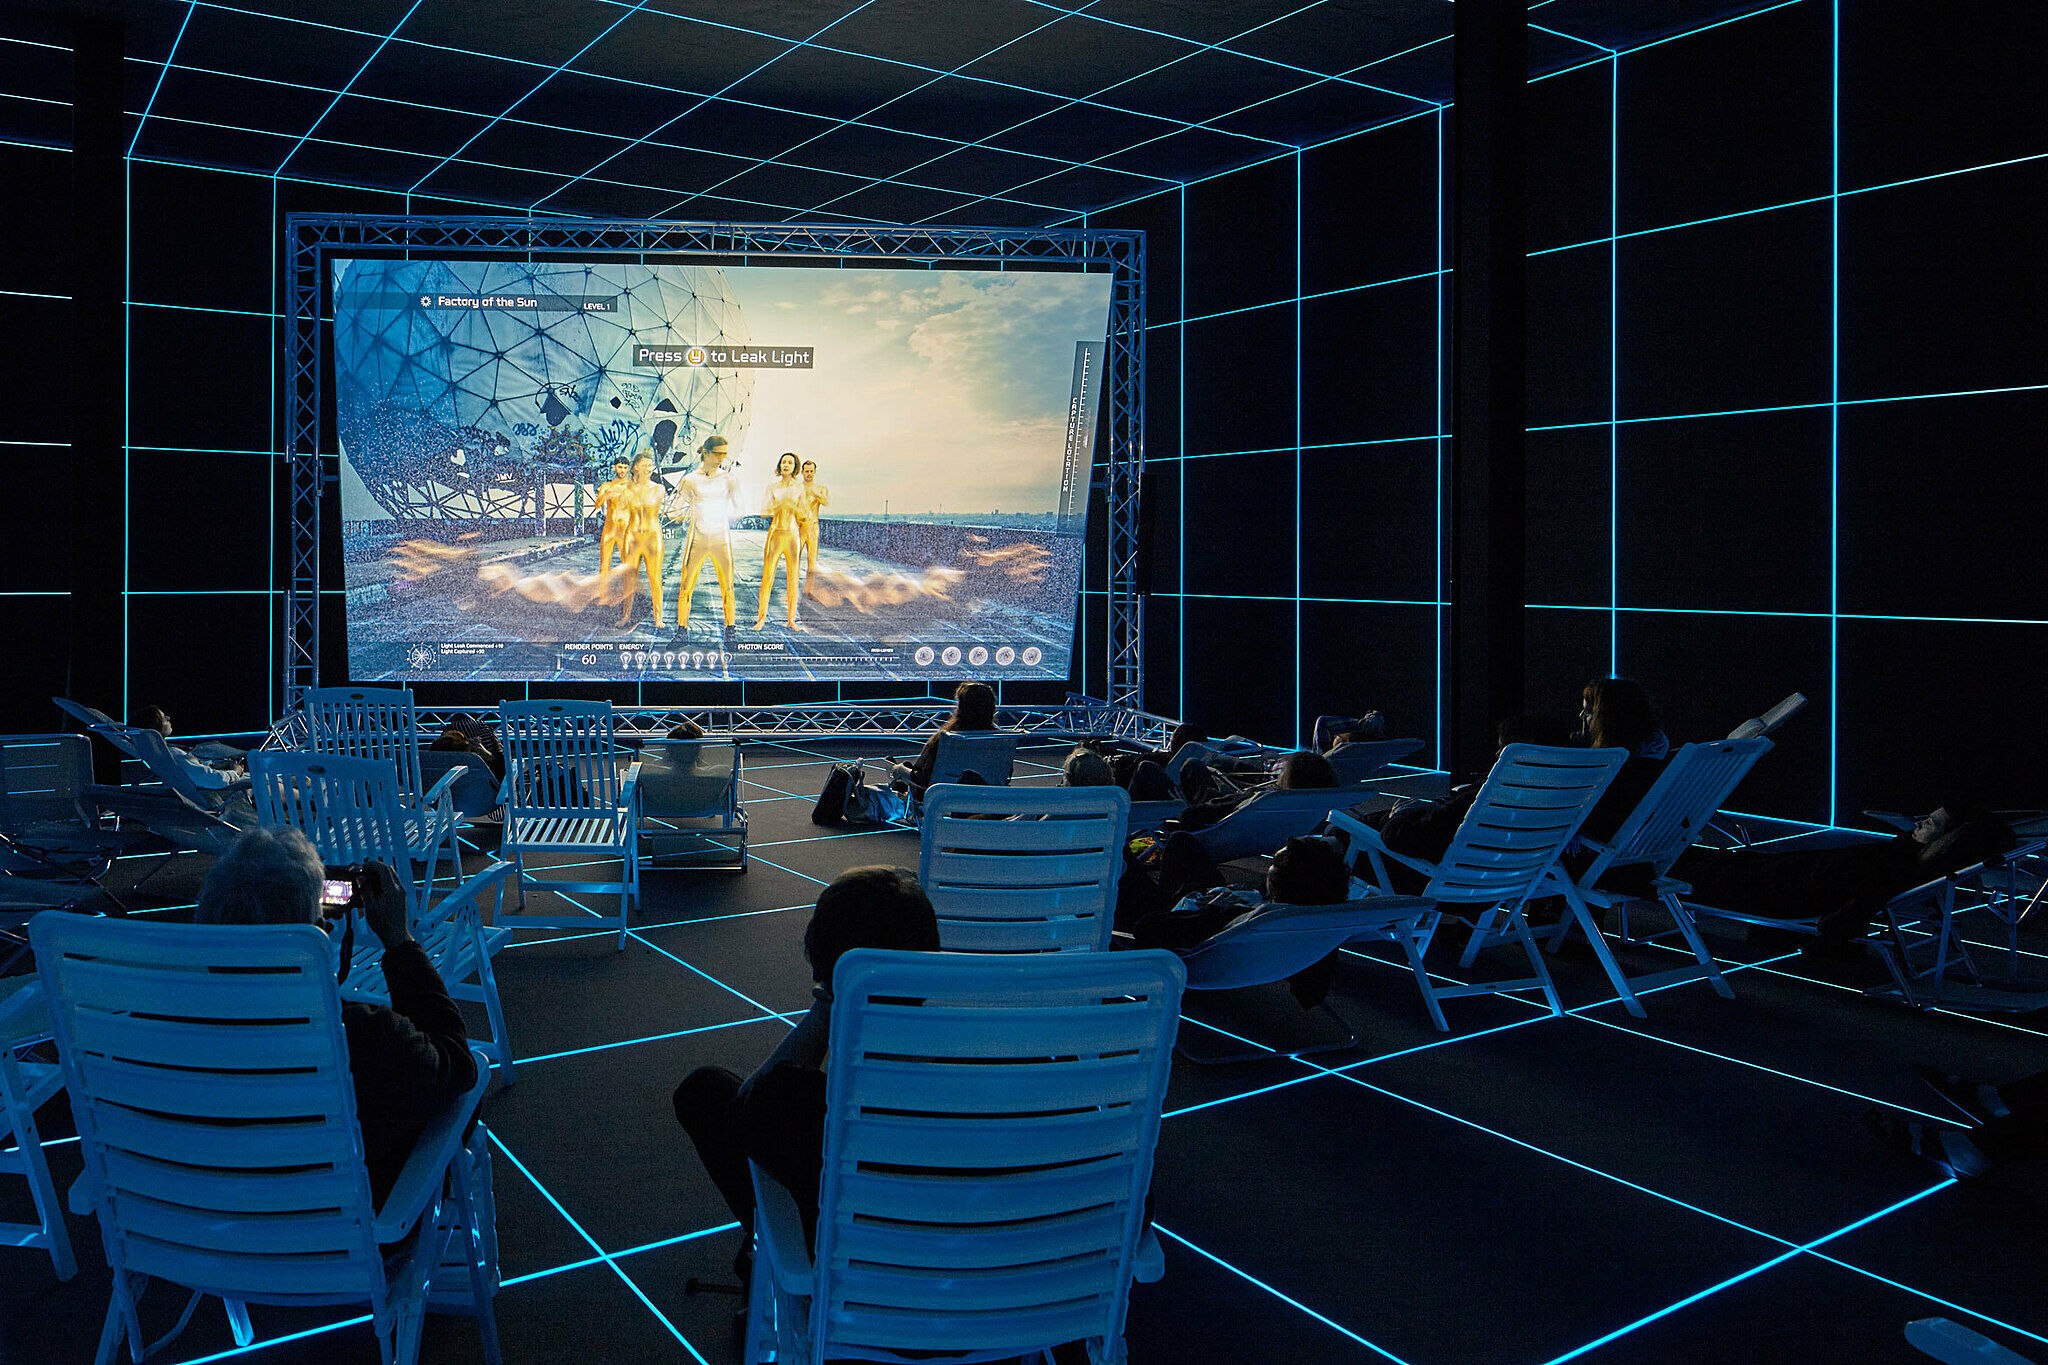 A work by Hito Steyerl. Visitors sit and recline in lawn chairs viewing a screen